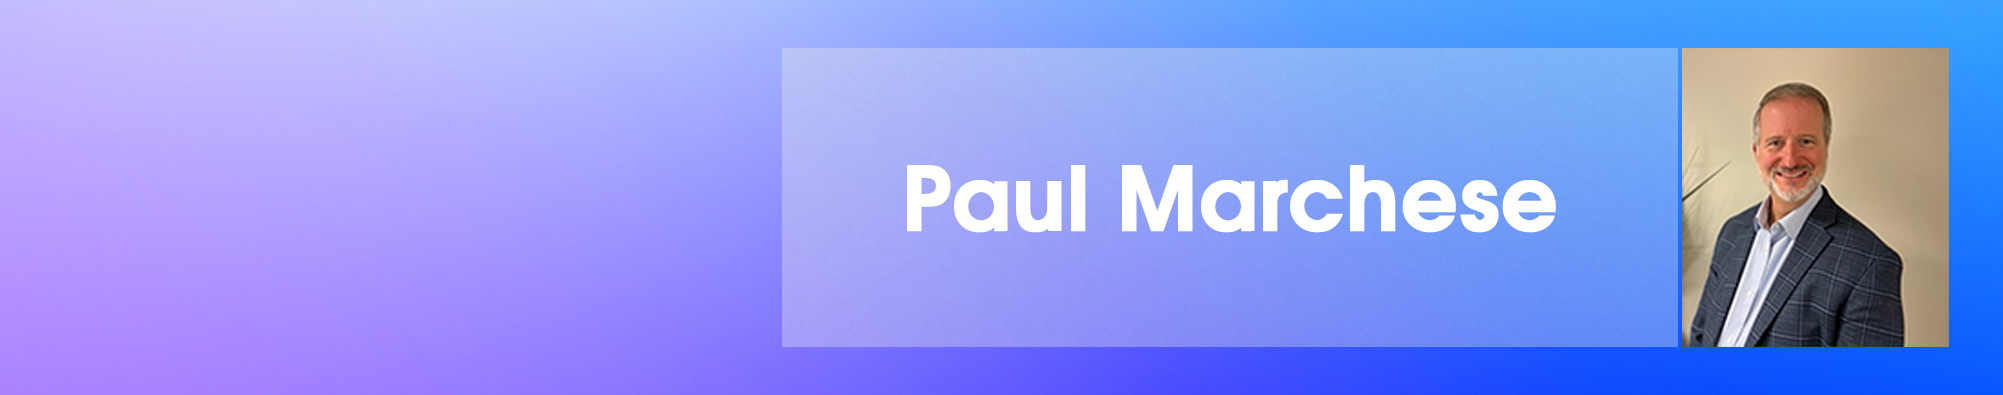 Paul Marchese's profile banner